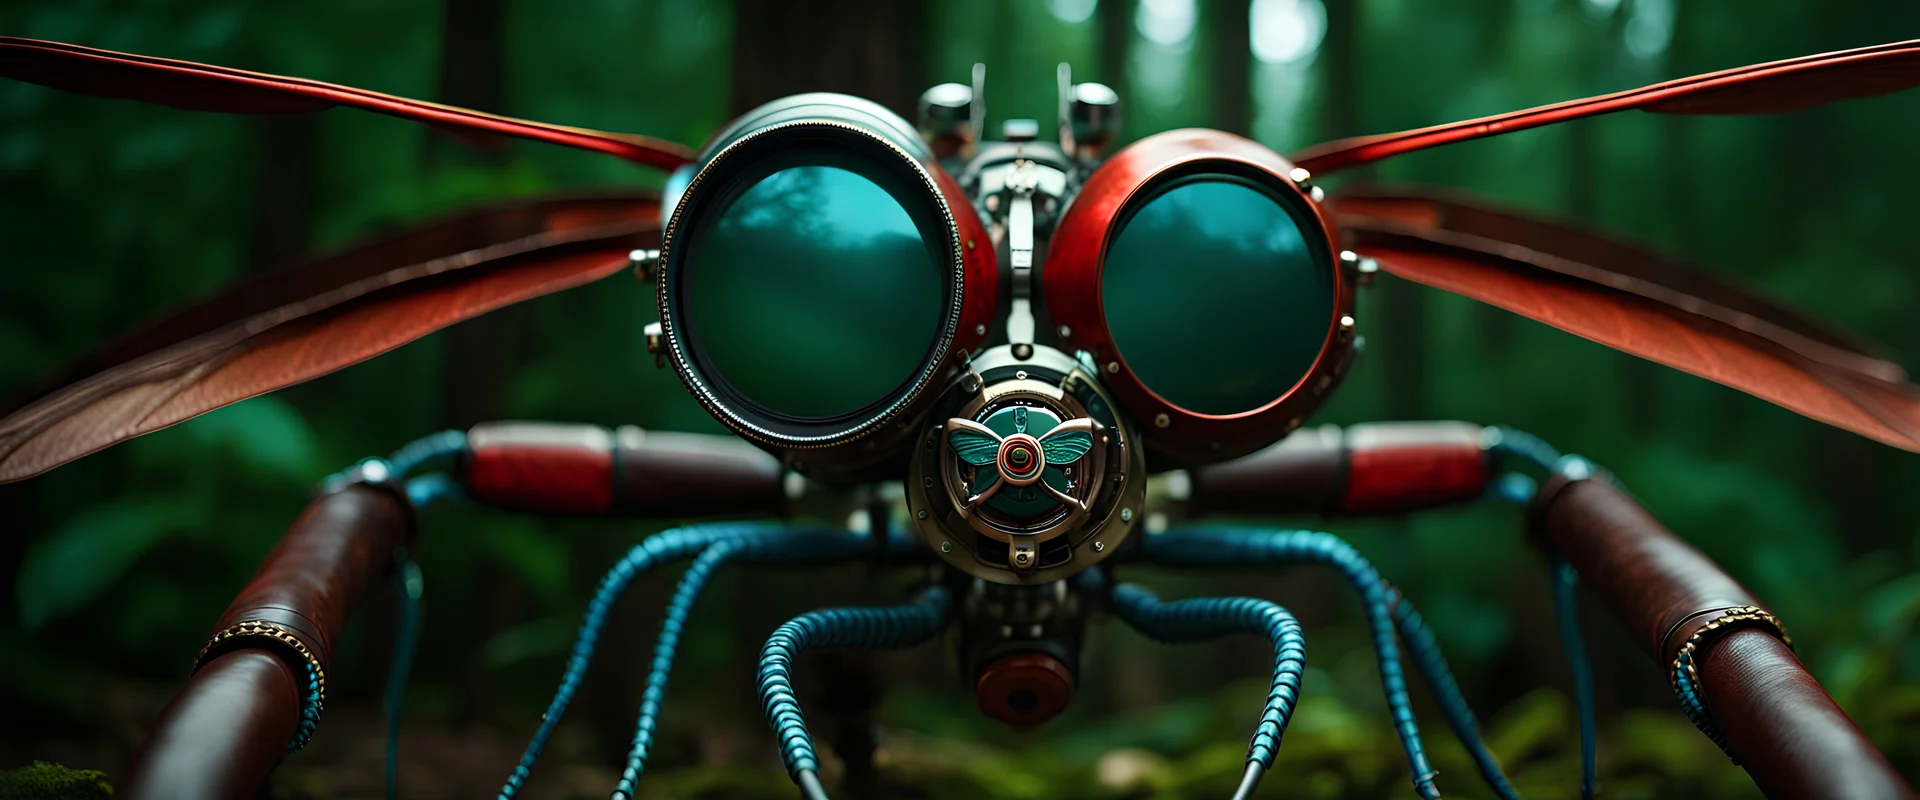 High-end hyperrealism epic red dragonfly hero DSLR Camera, Steampunk-inspired cinematic photography, symmetry forest alley background, Aesthetic combination of metallic sage green and titanium blue, Vintage style with brown pure leather accents, Art Nouveau visuals with Octane Render 3D tech, Ultra-High-Definition (UHD) cinematic character rendering, Detailed close-ups capturing intricate beauty, Aim for hyper-detailed 8K